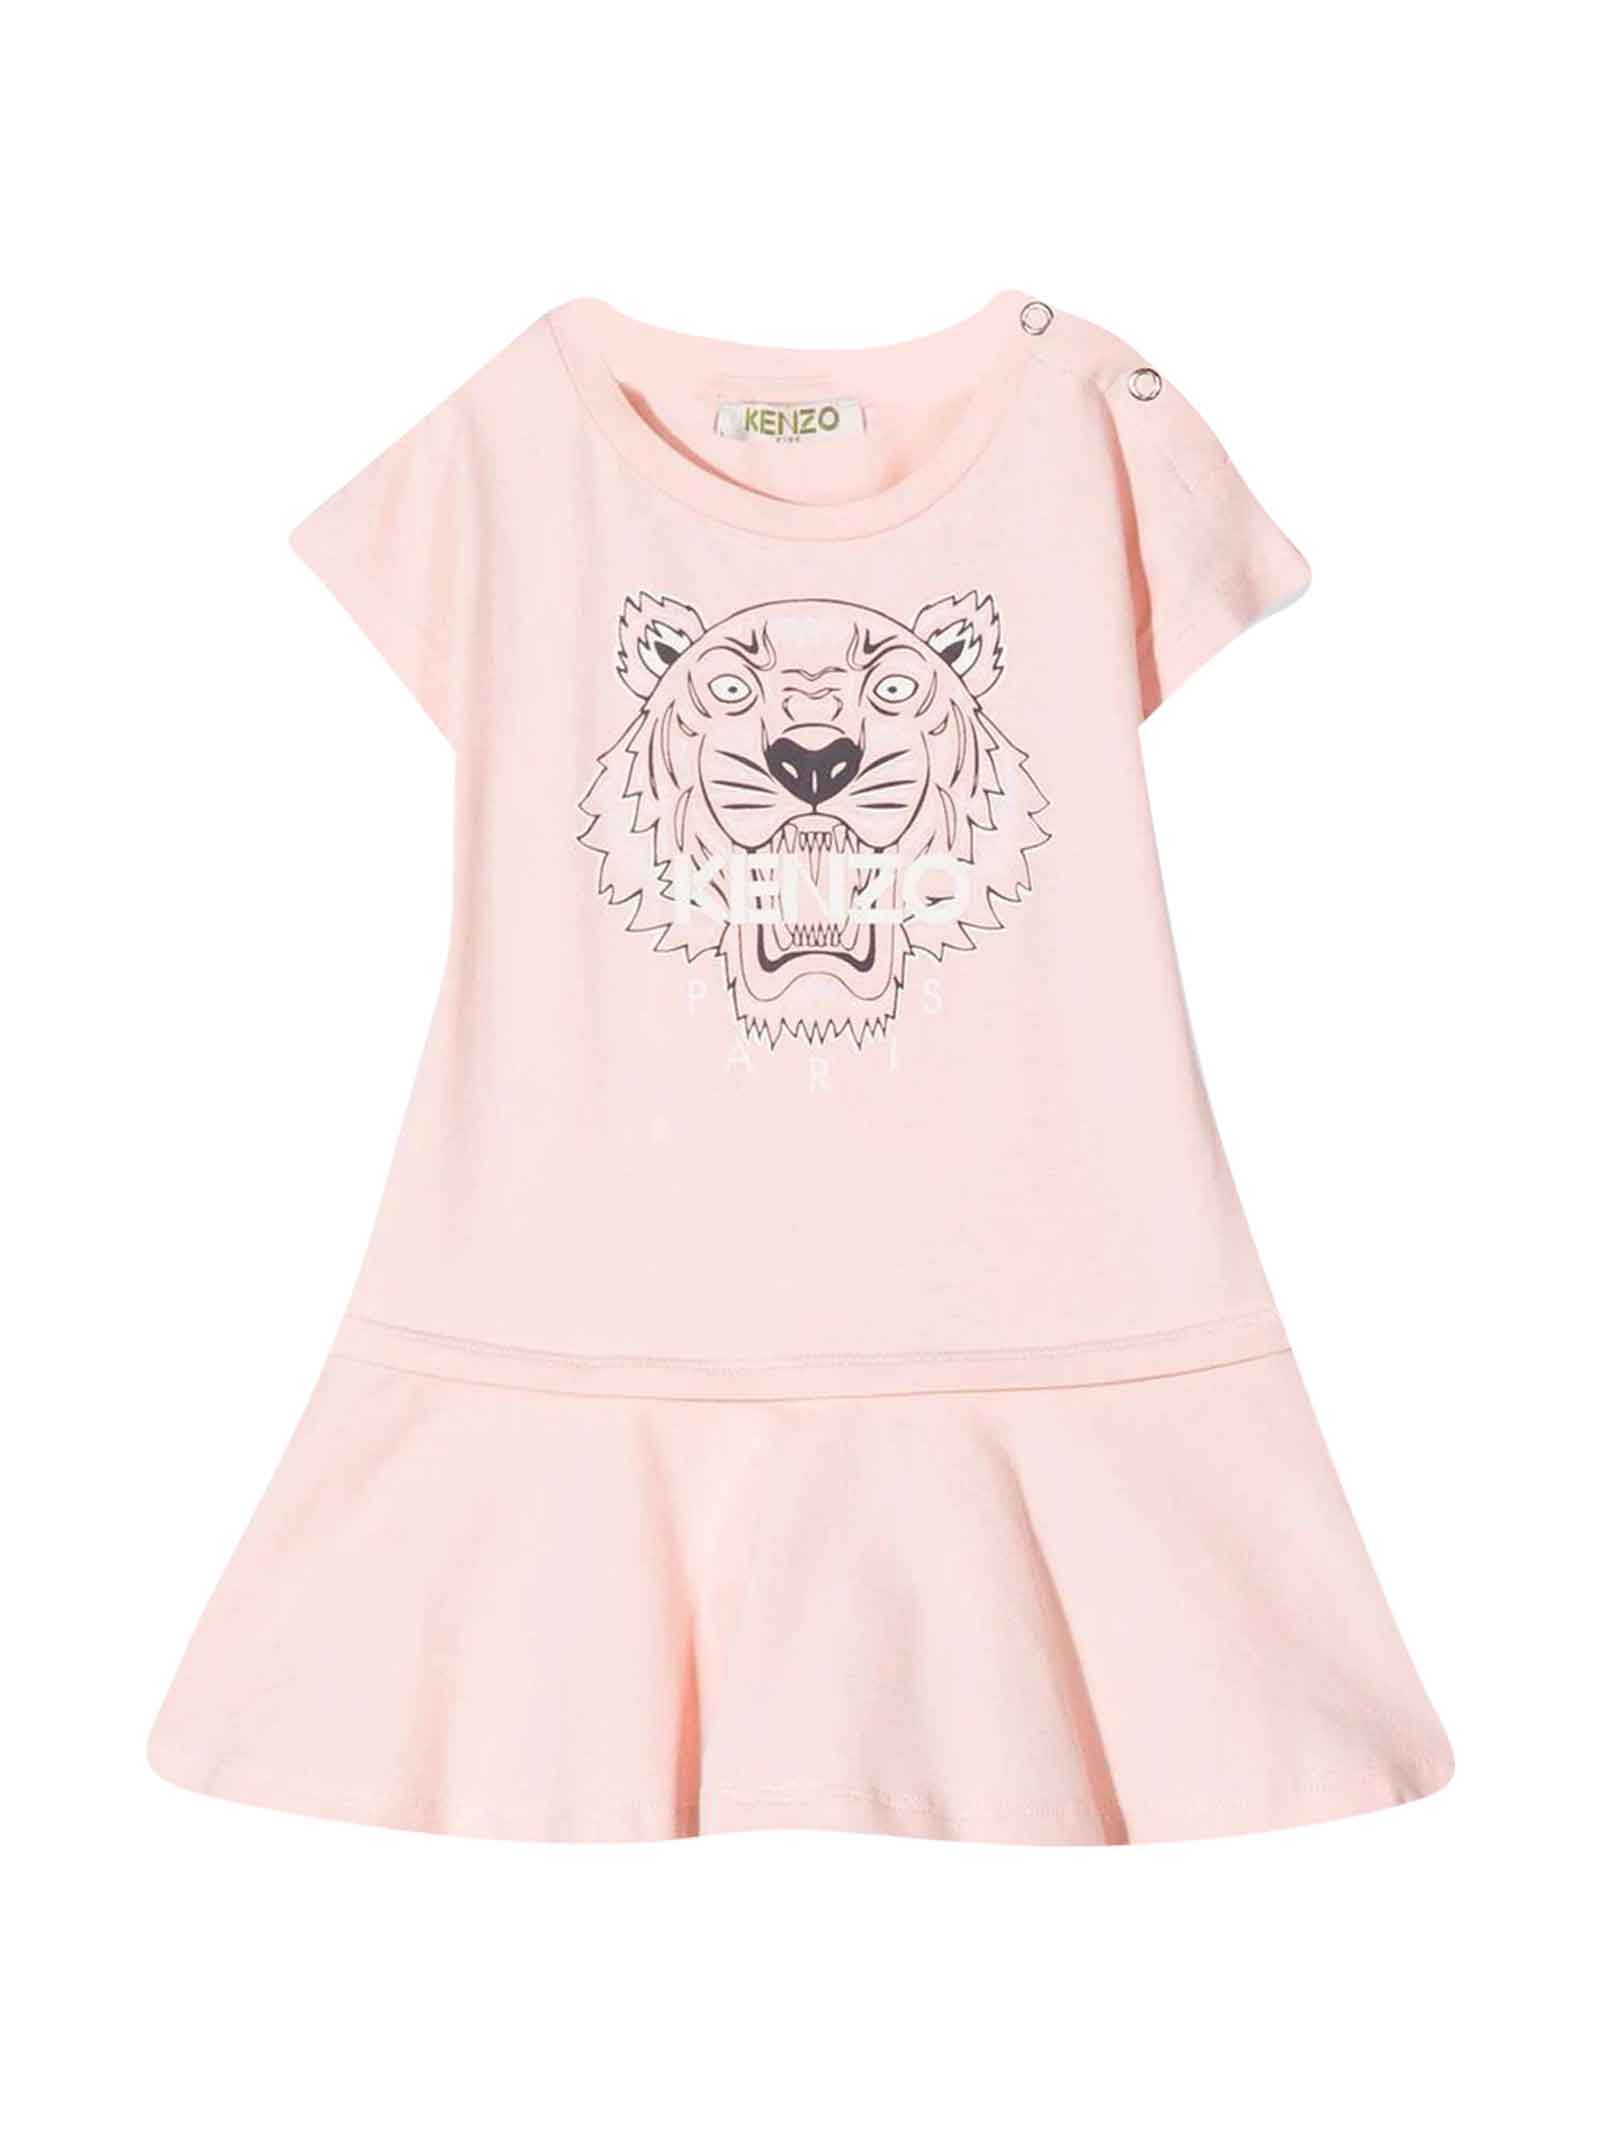 Kenzo Kids Pink Baby Girl Dress T-shirt Model With Tiger Head Print, With Logo On The Front, Round Neckline, Short Sleeves, Low Waist, Flared Skirt And Curved He